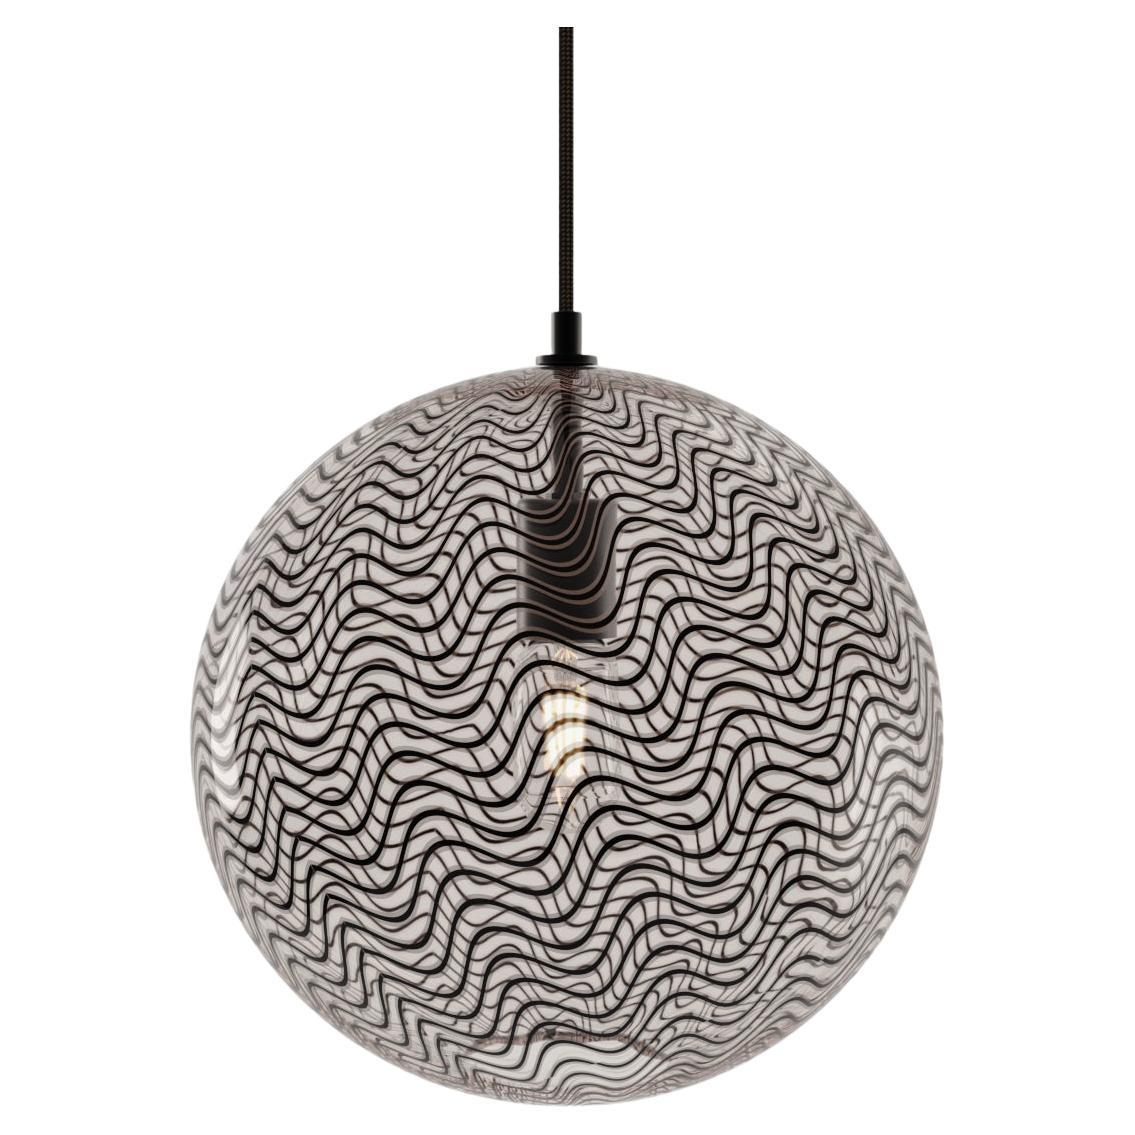 KEEP Handblown Glass Globe Pendant Light, Mid-Century Inspired Patterned Glass For Sale